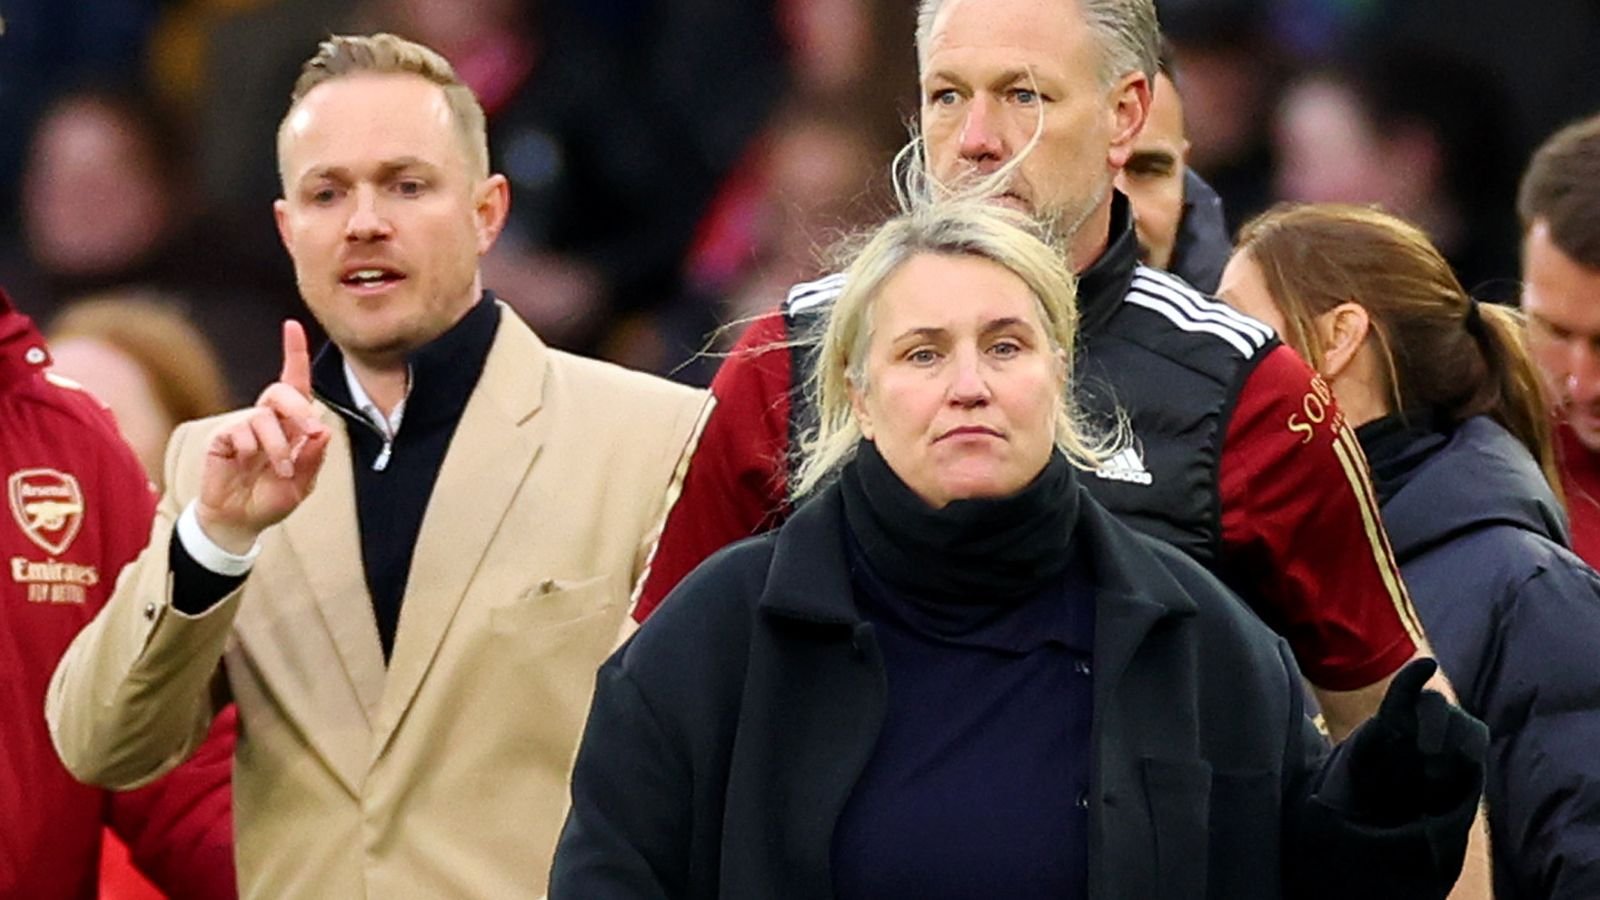 Emma Hayes says ‘male aggression’ should not be tolerated as Jonas Eidevall defends himself after Conti Cup final altercation | Football News